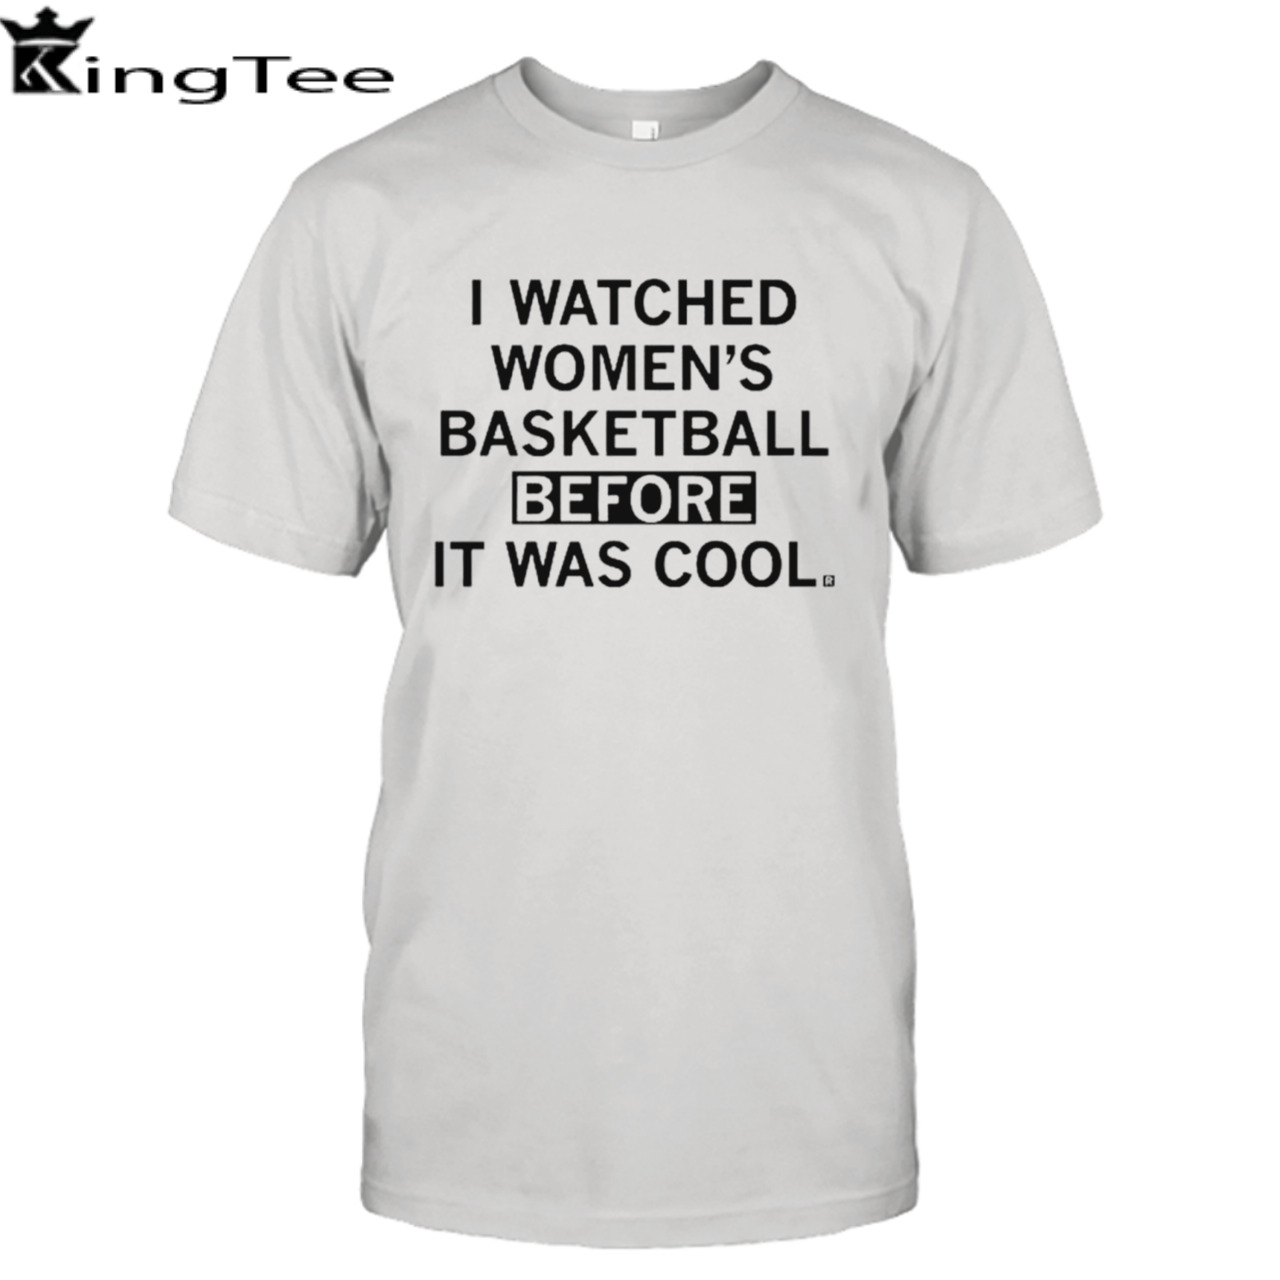 I watched women’s basketball before it was cool shirt